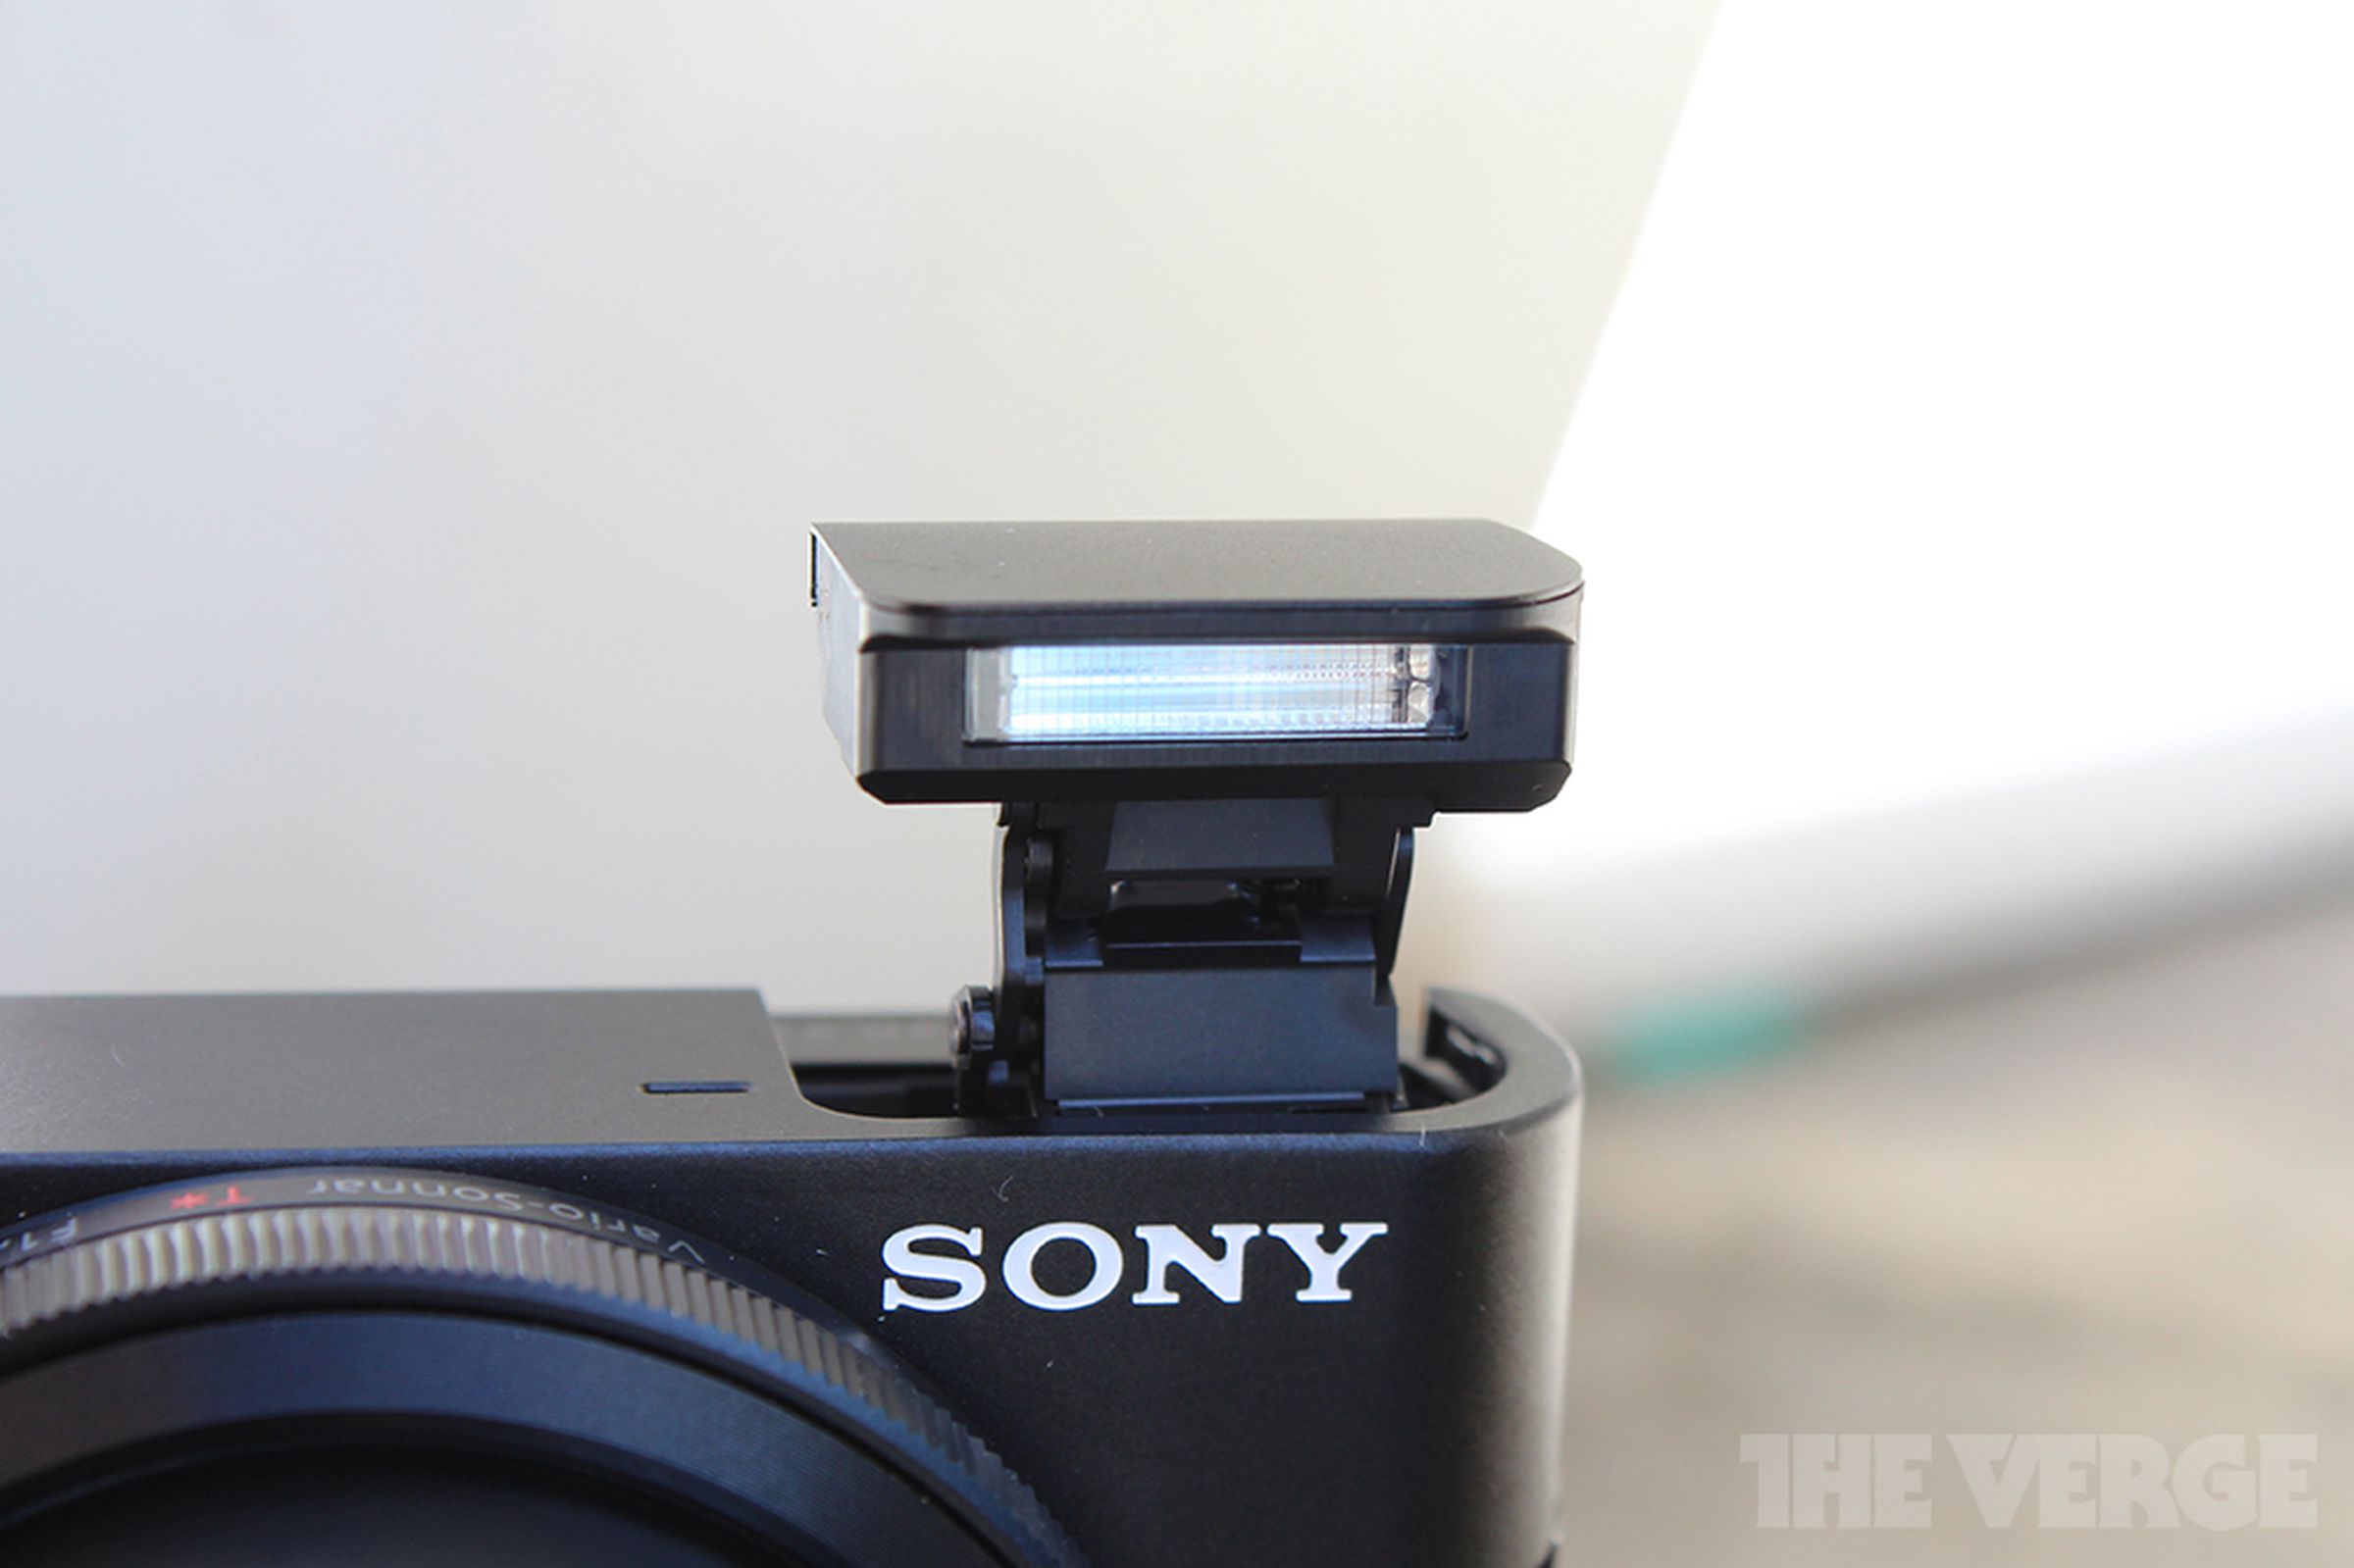 Sony Cyber-shot DSC-RX100 hands on pictures 